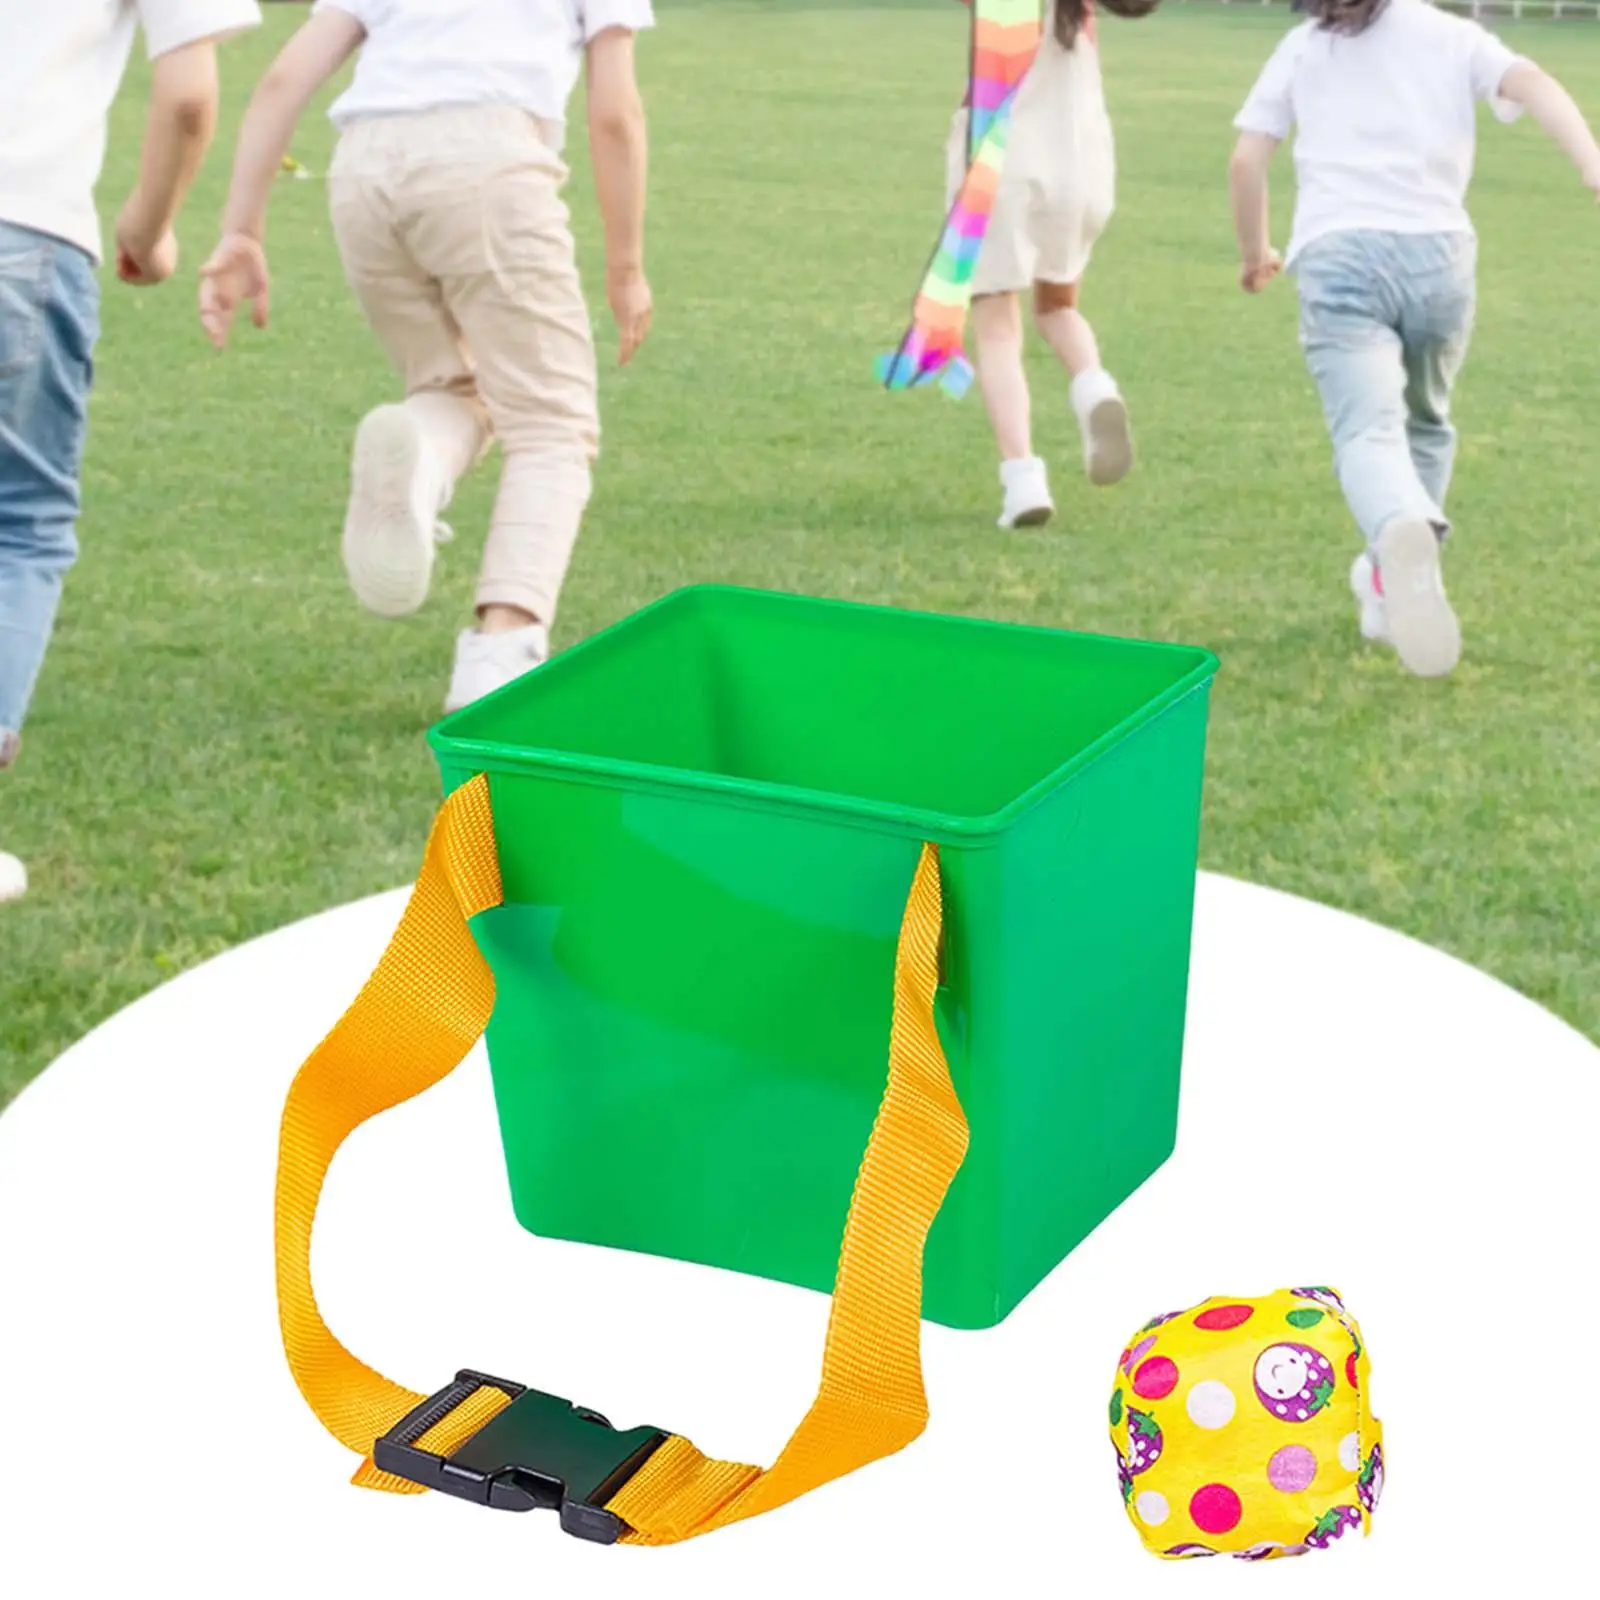 Sandbag Buckets Toss Game Throwing Sand Bags for Party Coordination Garden